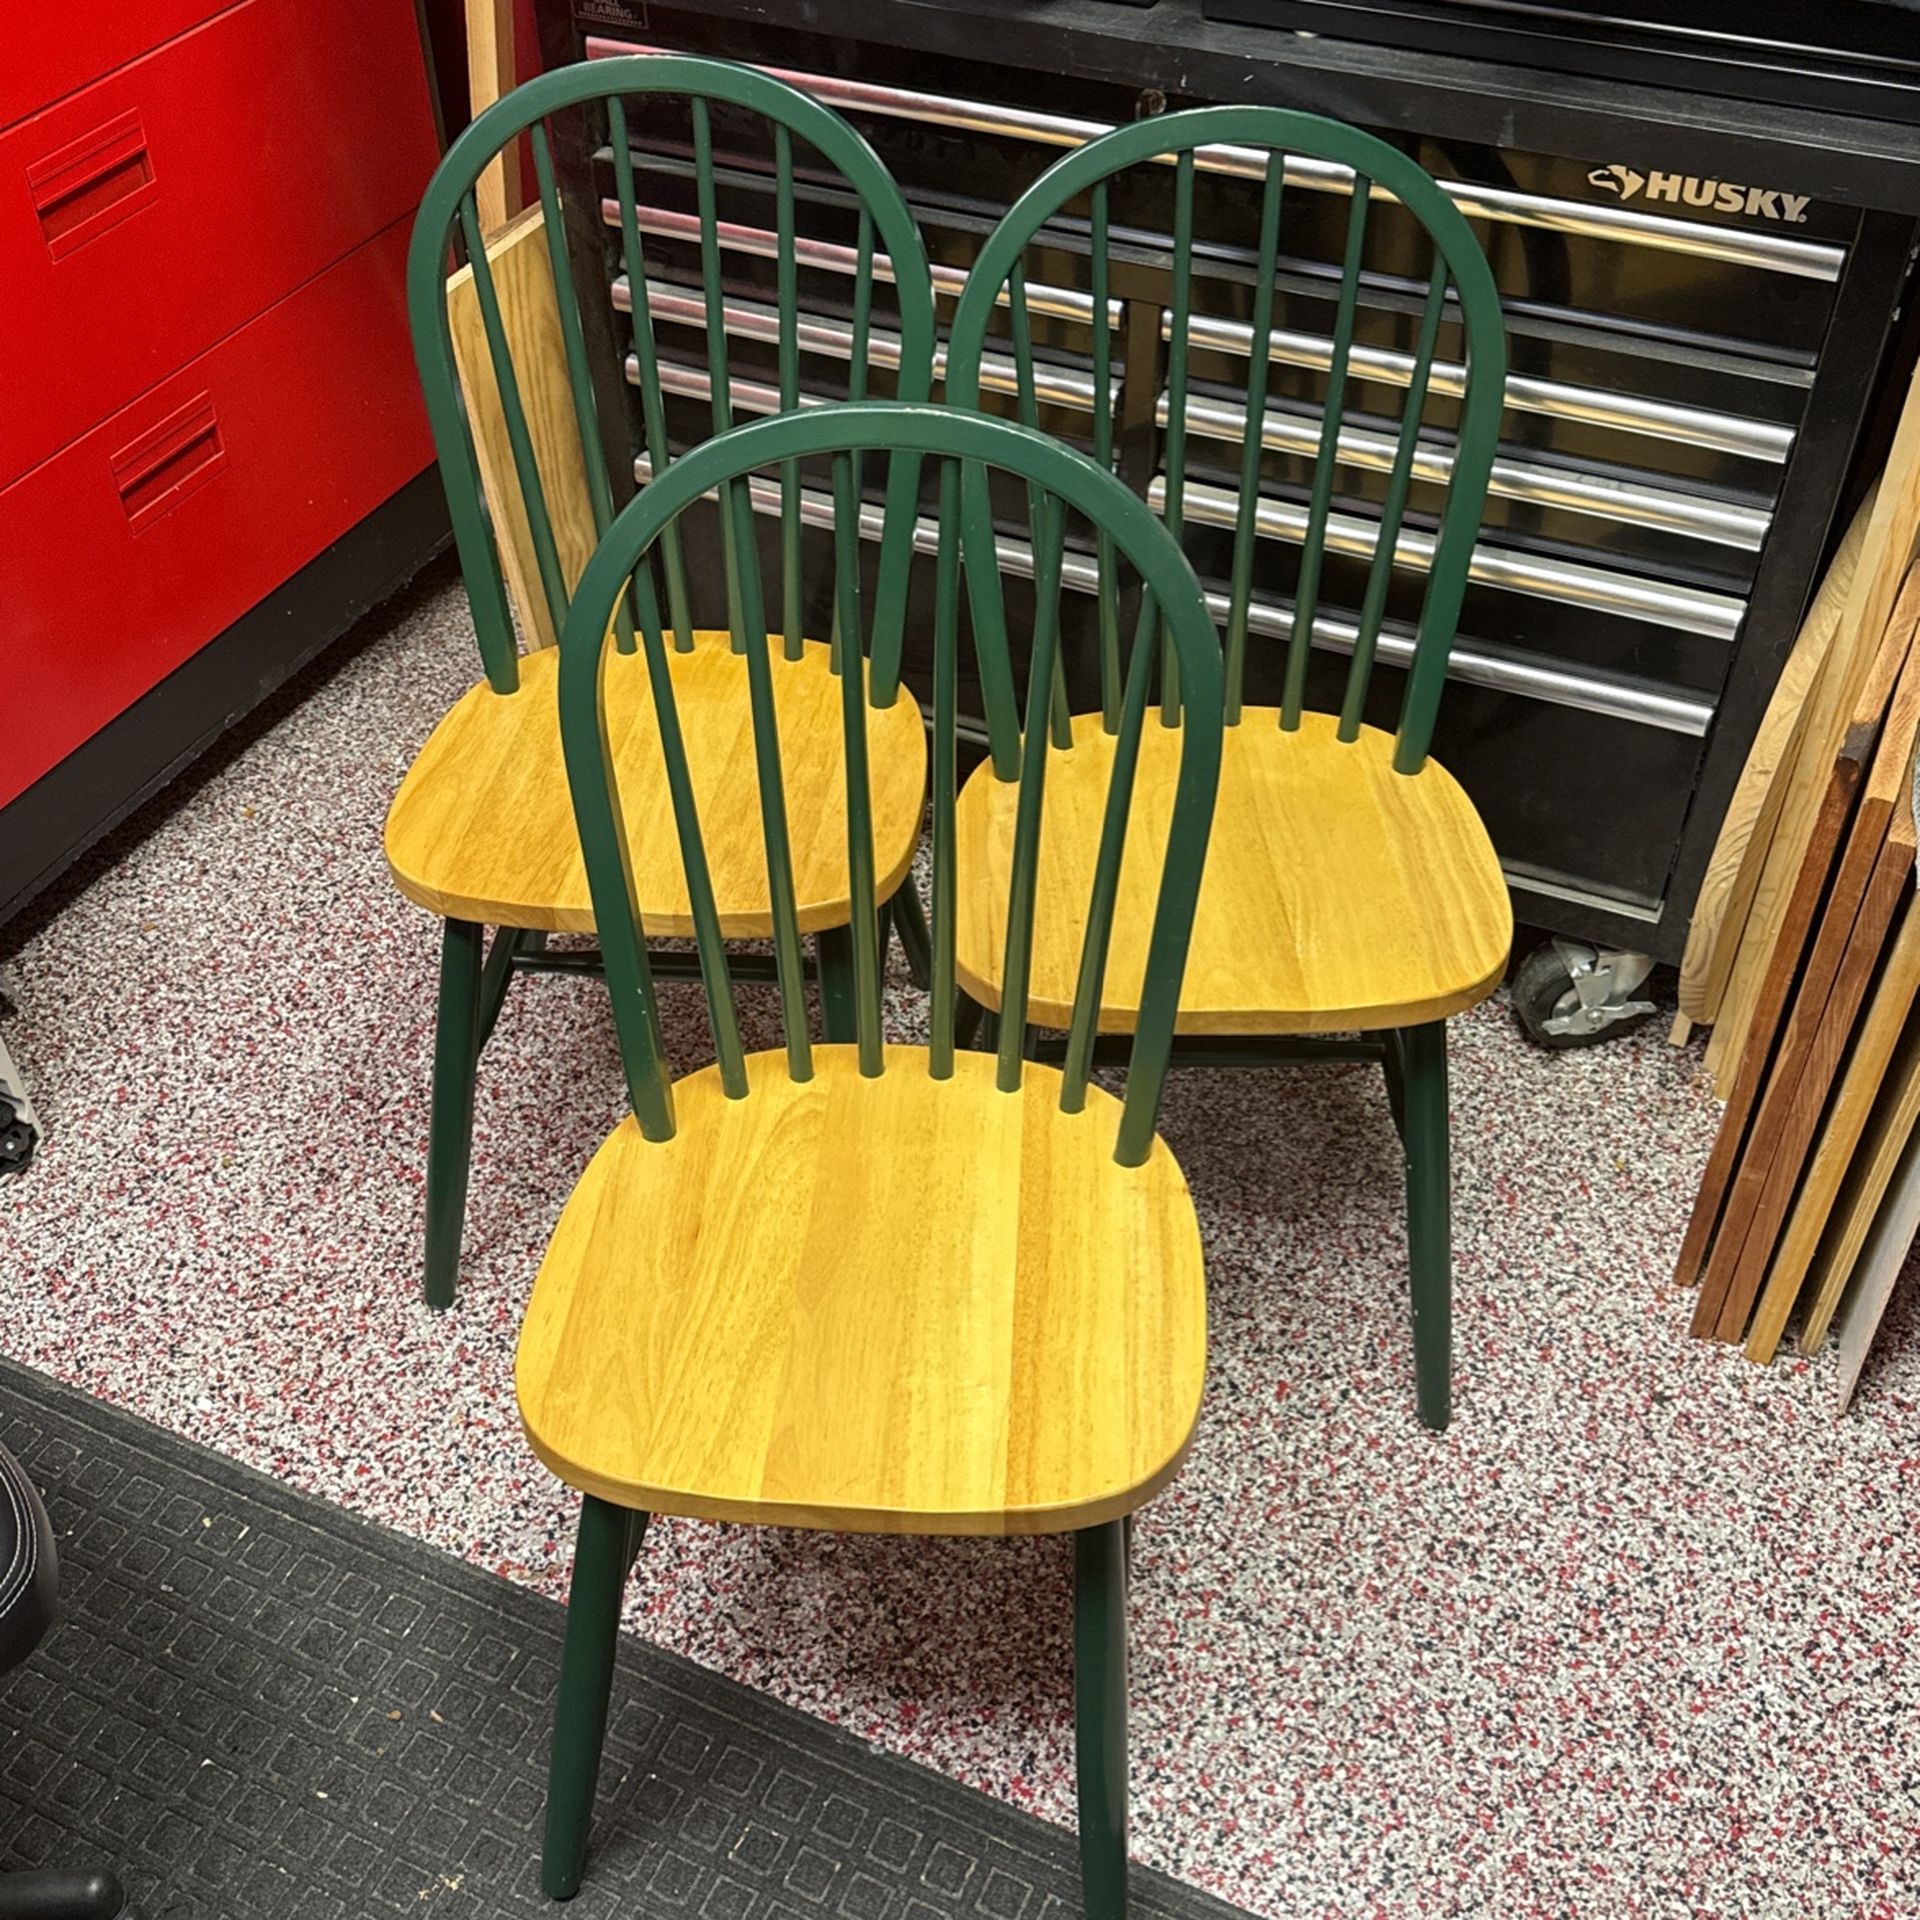 Solid Wooden Chairs 